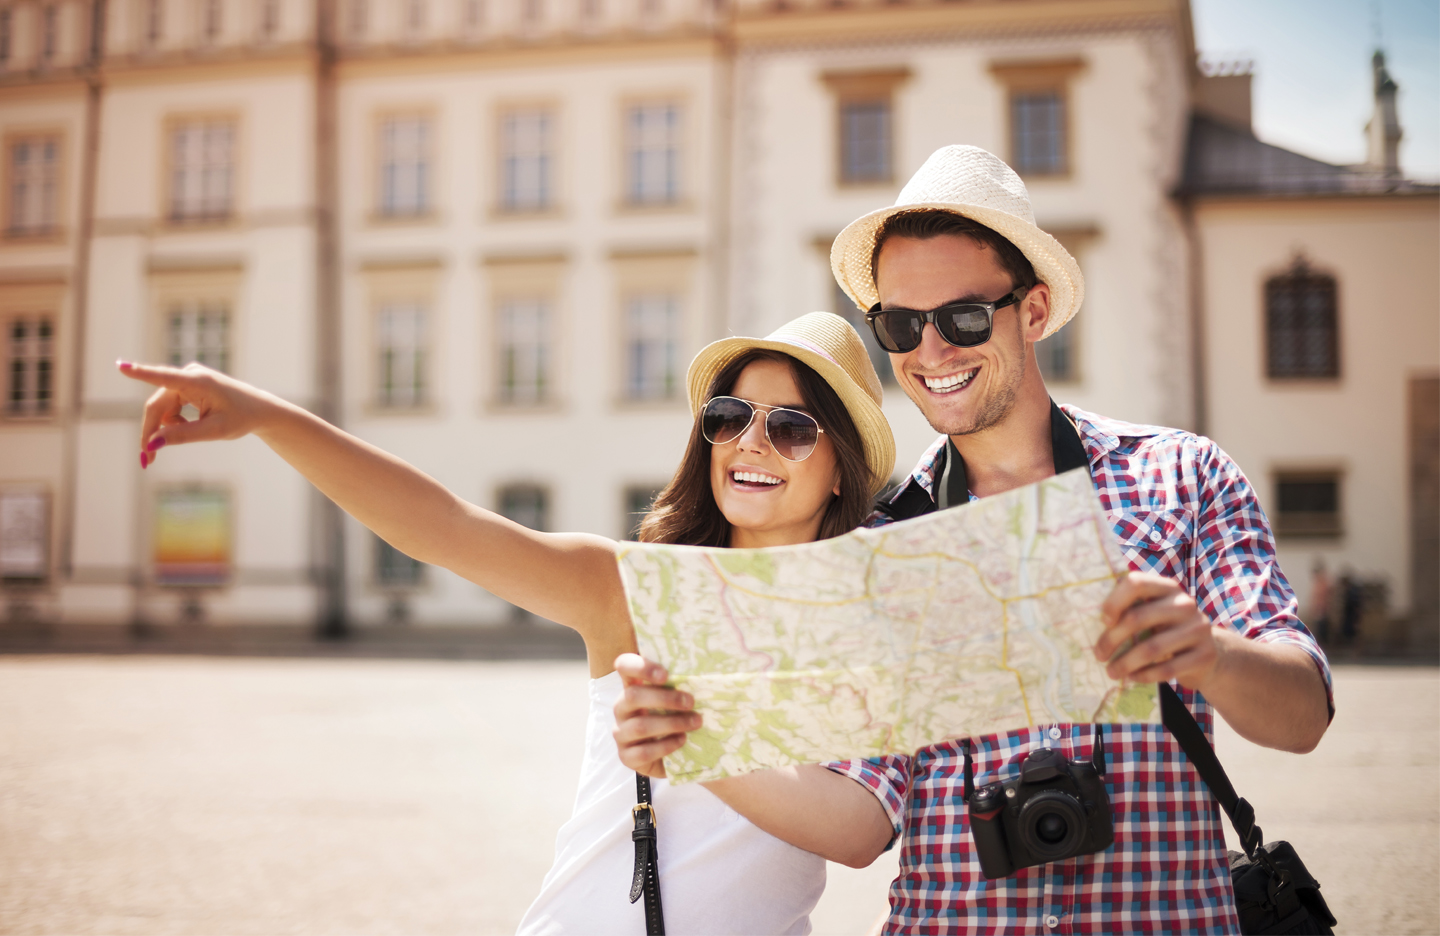 Travelling soon? Tips to stay sharp and avoid fraud